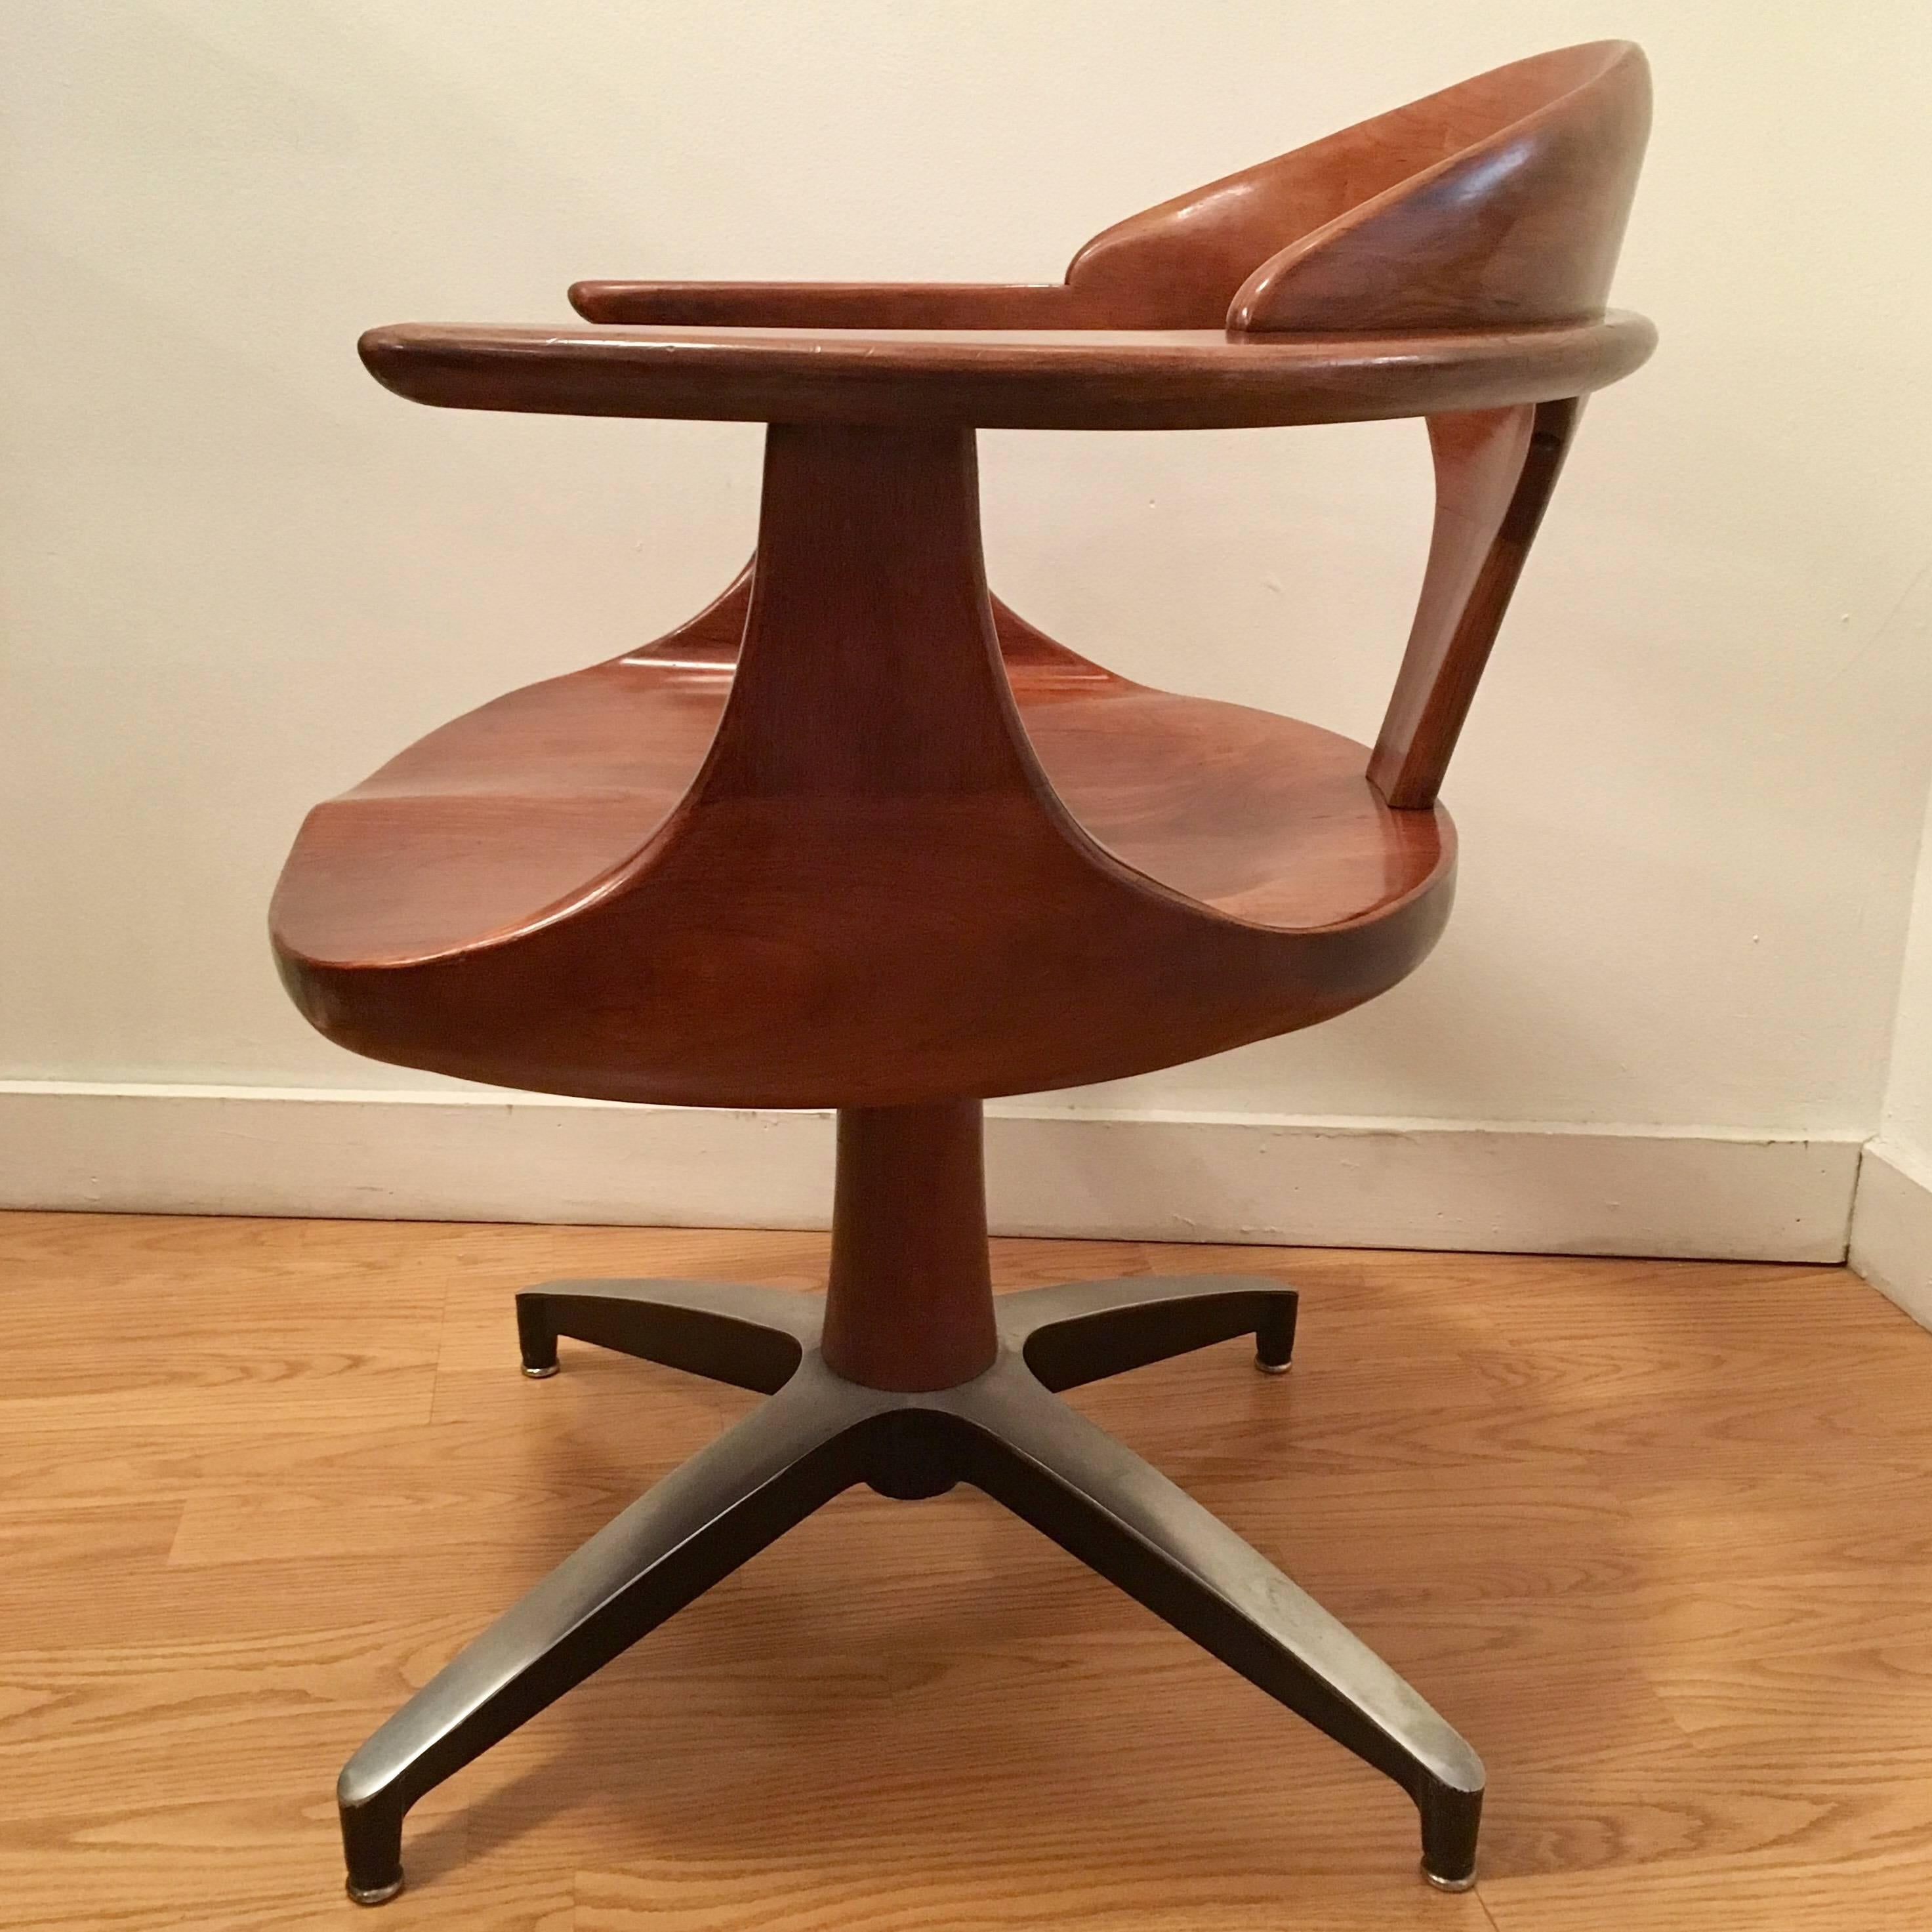 A sculptural set of American 1960s hardwood cherry with a brown doeskin finish and curved steel bases. The rare set is from Heywood Wakefields Cliff House line. A matching dining set available.
Heywood' Fine craftsmanship and last line, was their